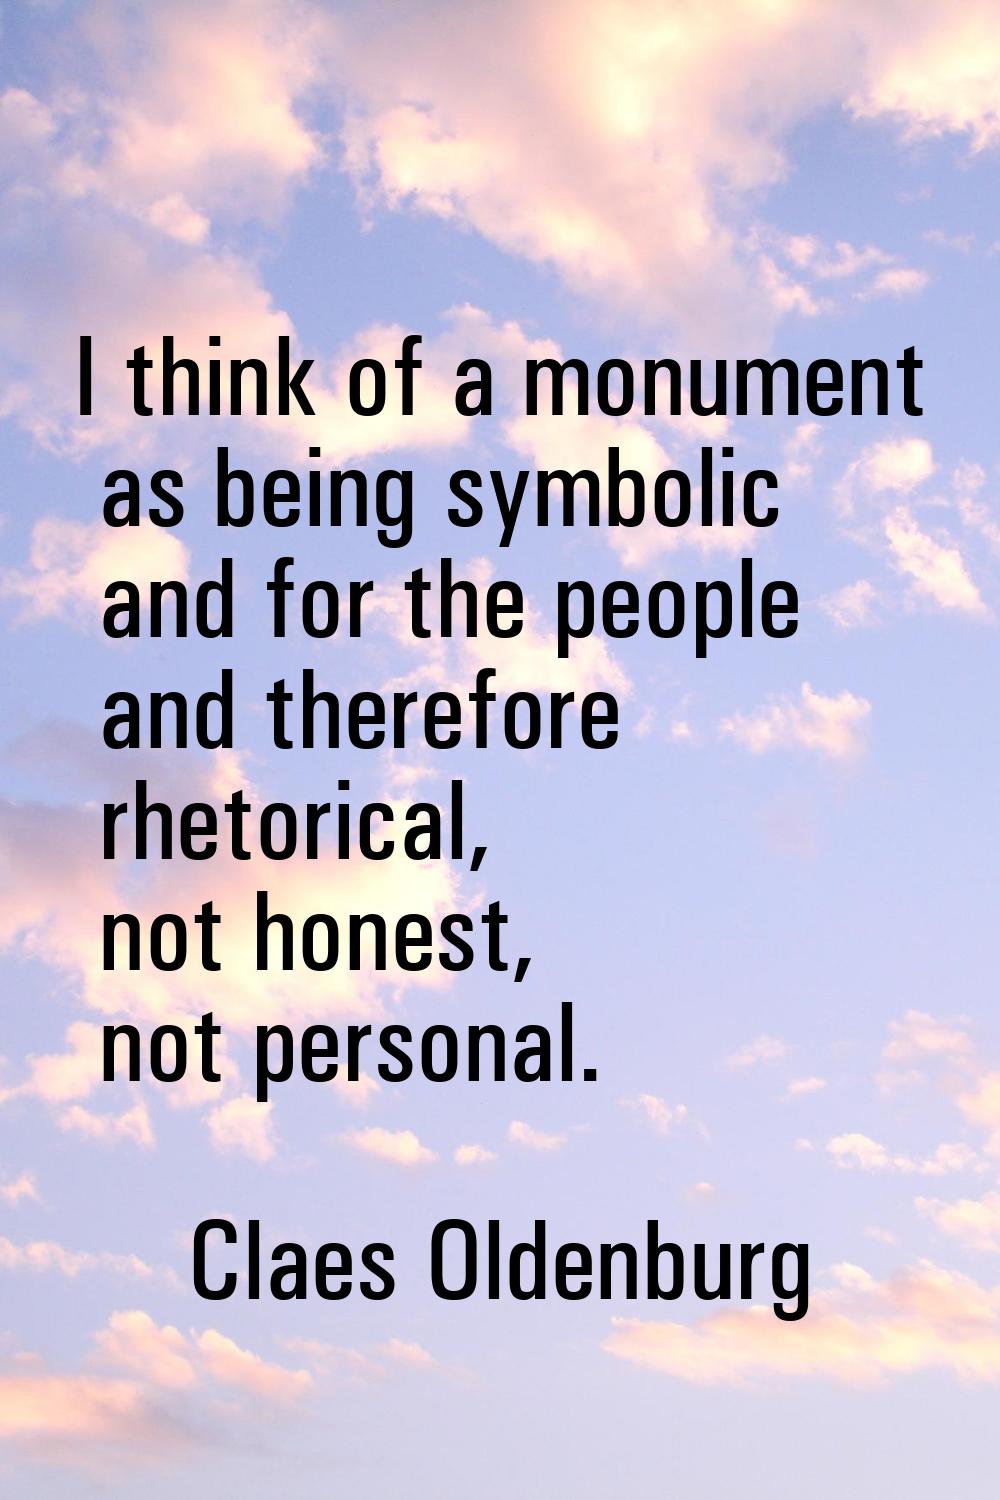 I think of a monument as being symbolic and for the people and therefore rhetorical, not honest, no